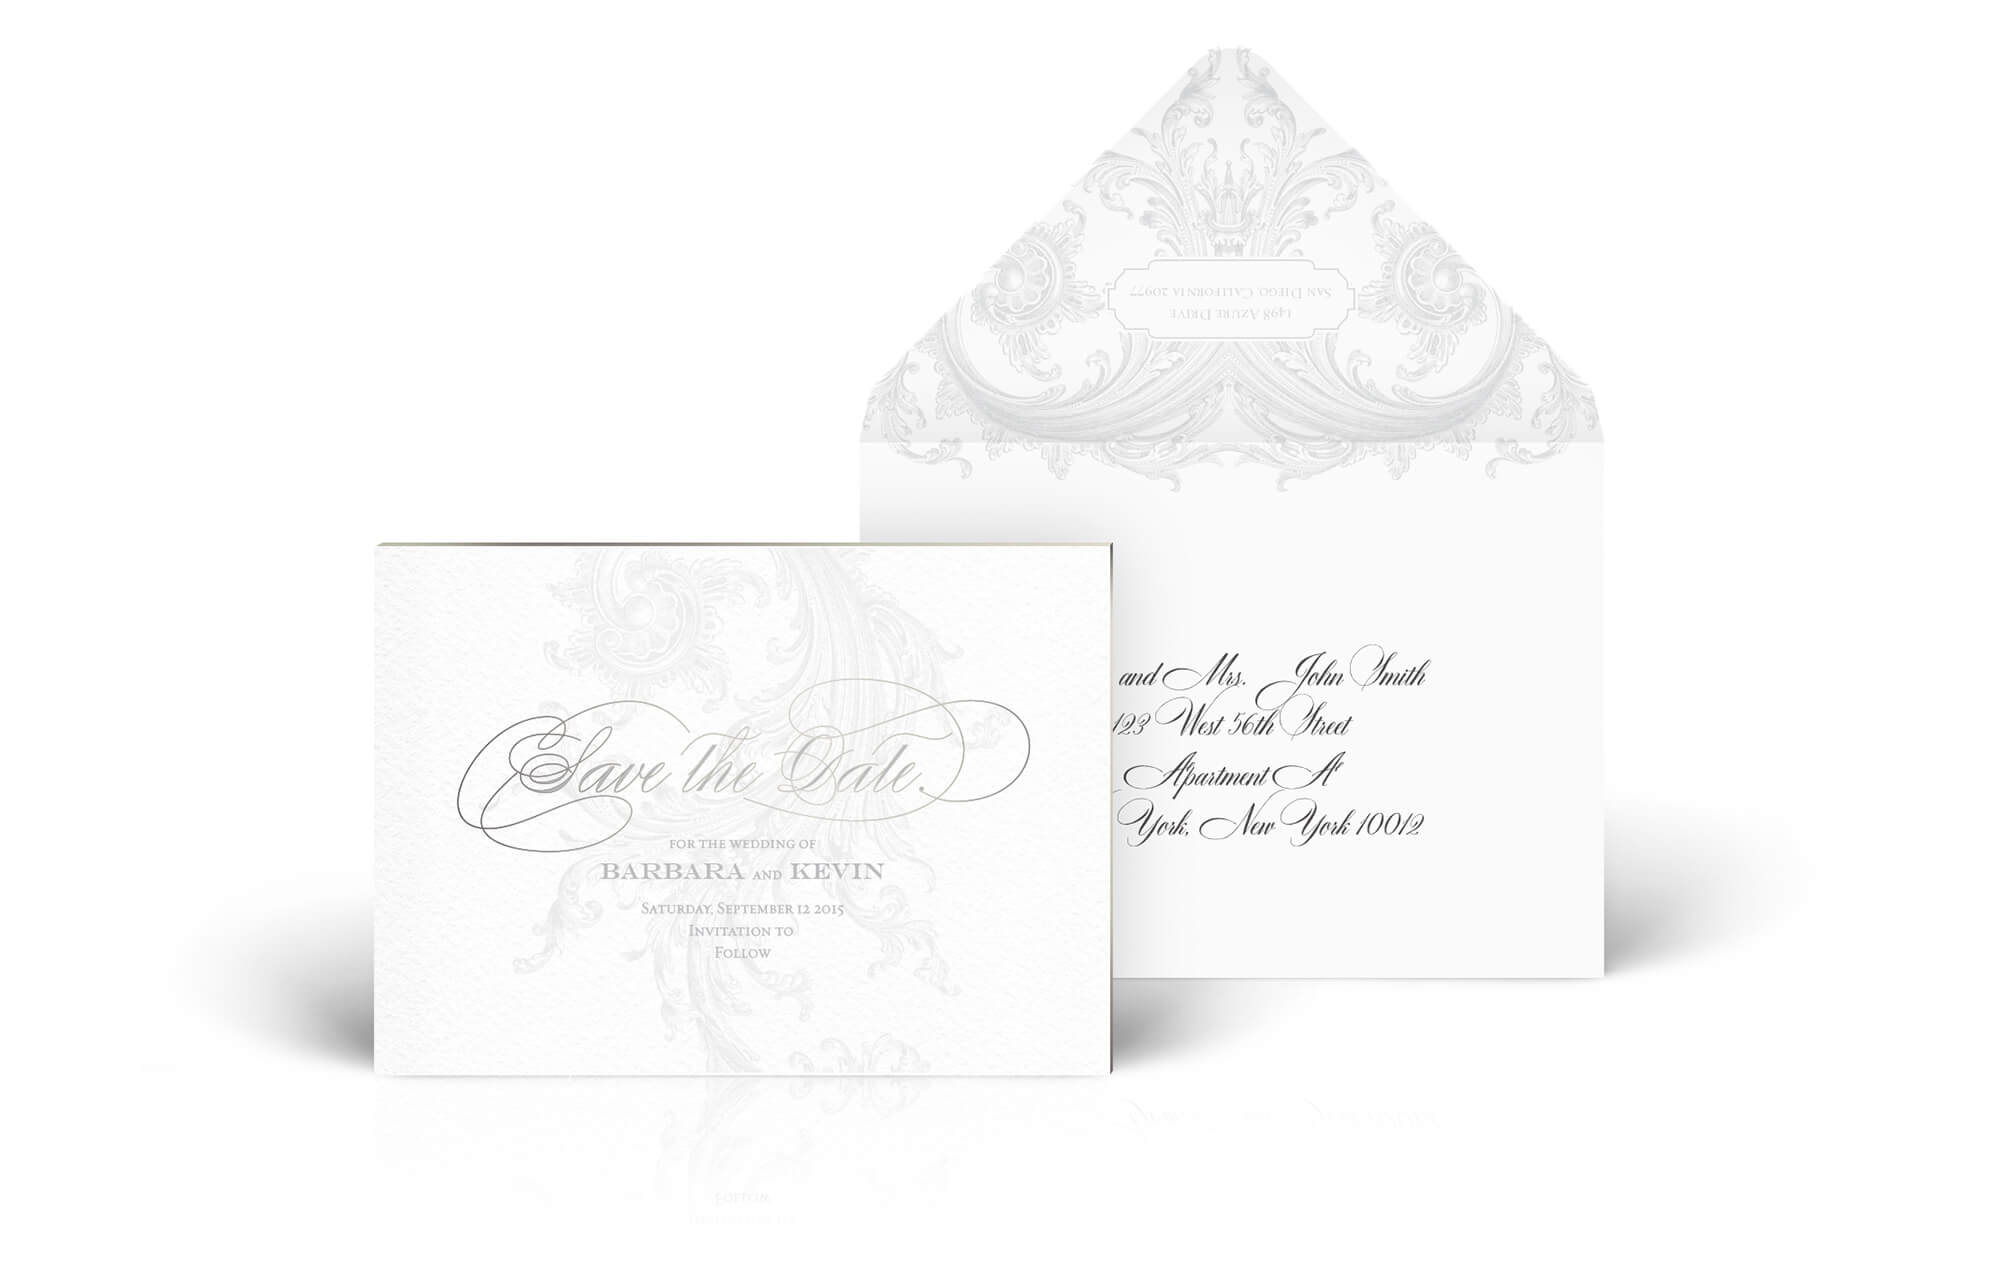 Ornate flourished save the date